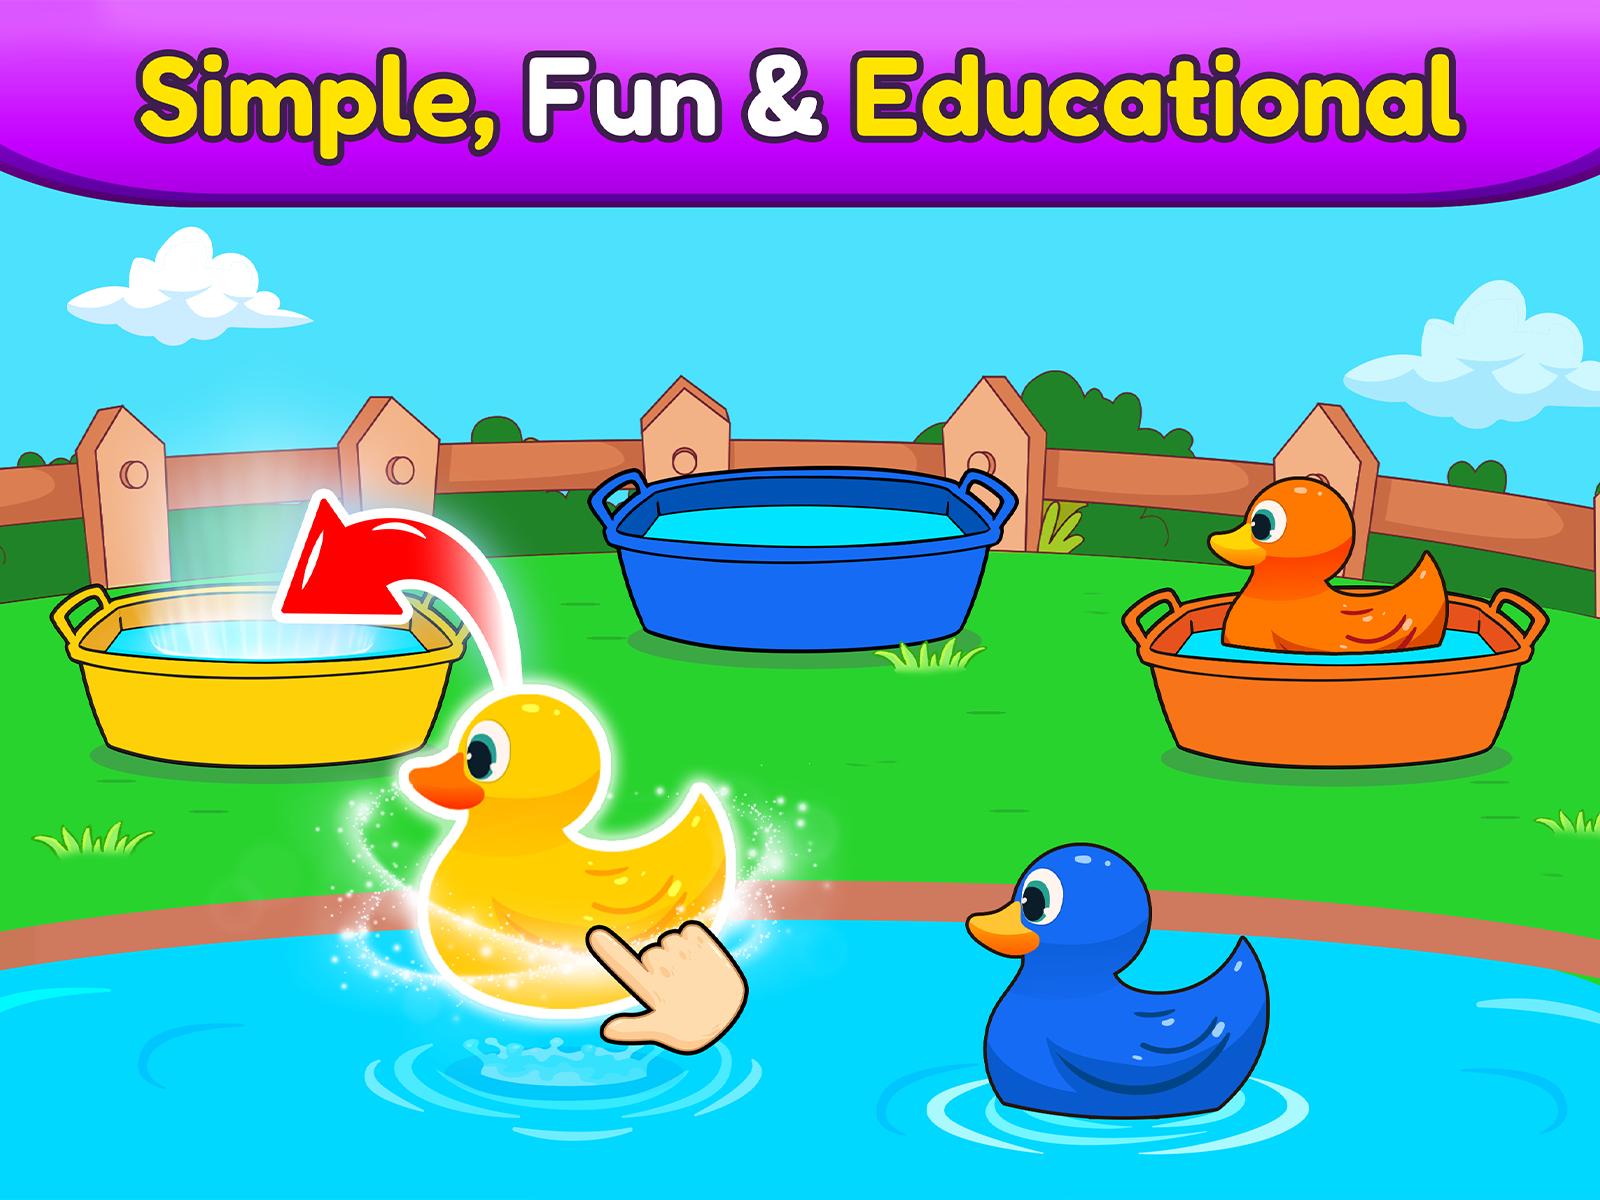 Baby Games for 2,3,4 year old toddlers - Free PC Download